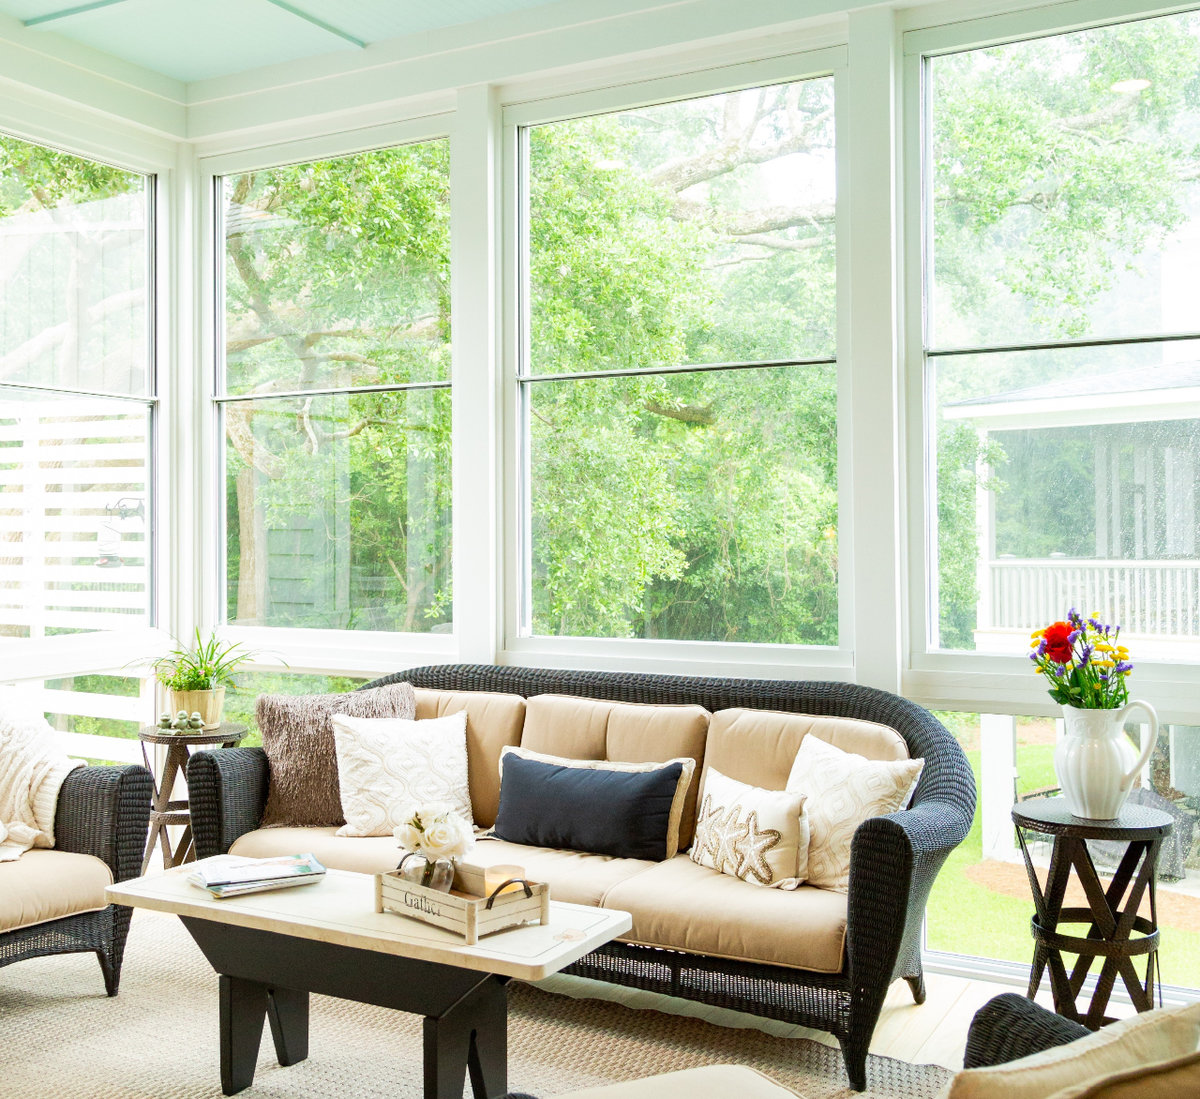 Interior image of a glass sunroom with a white couch and decor